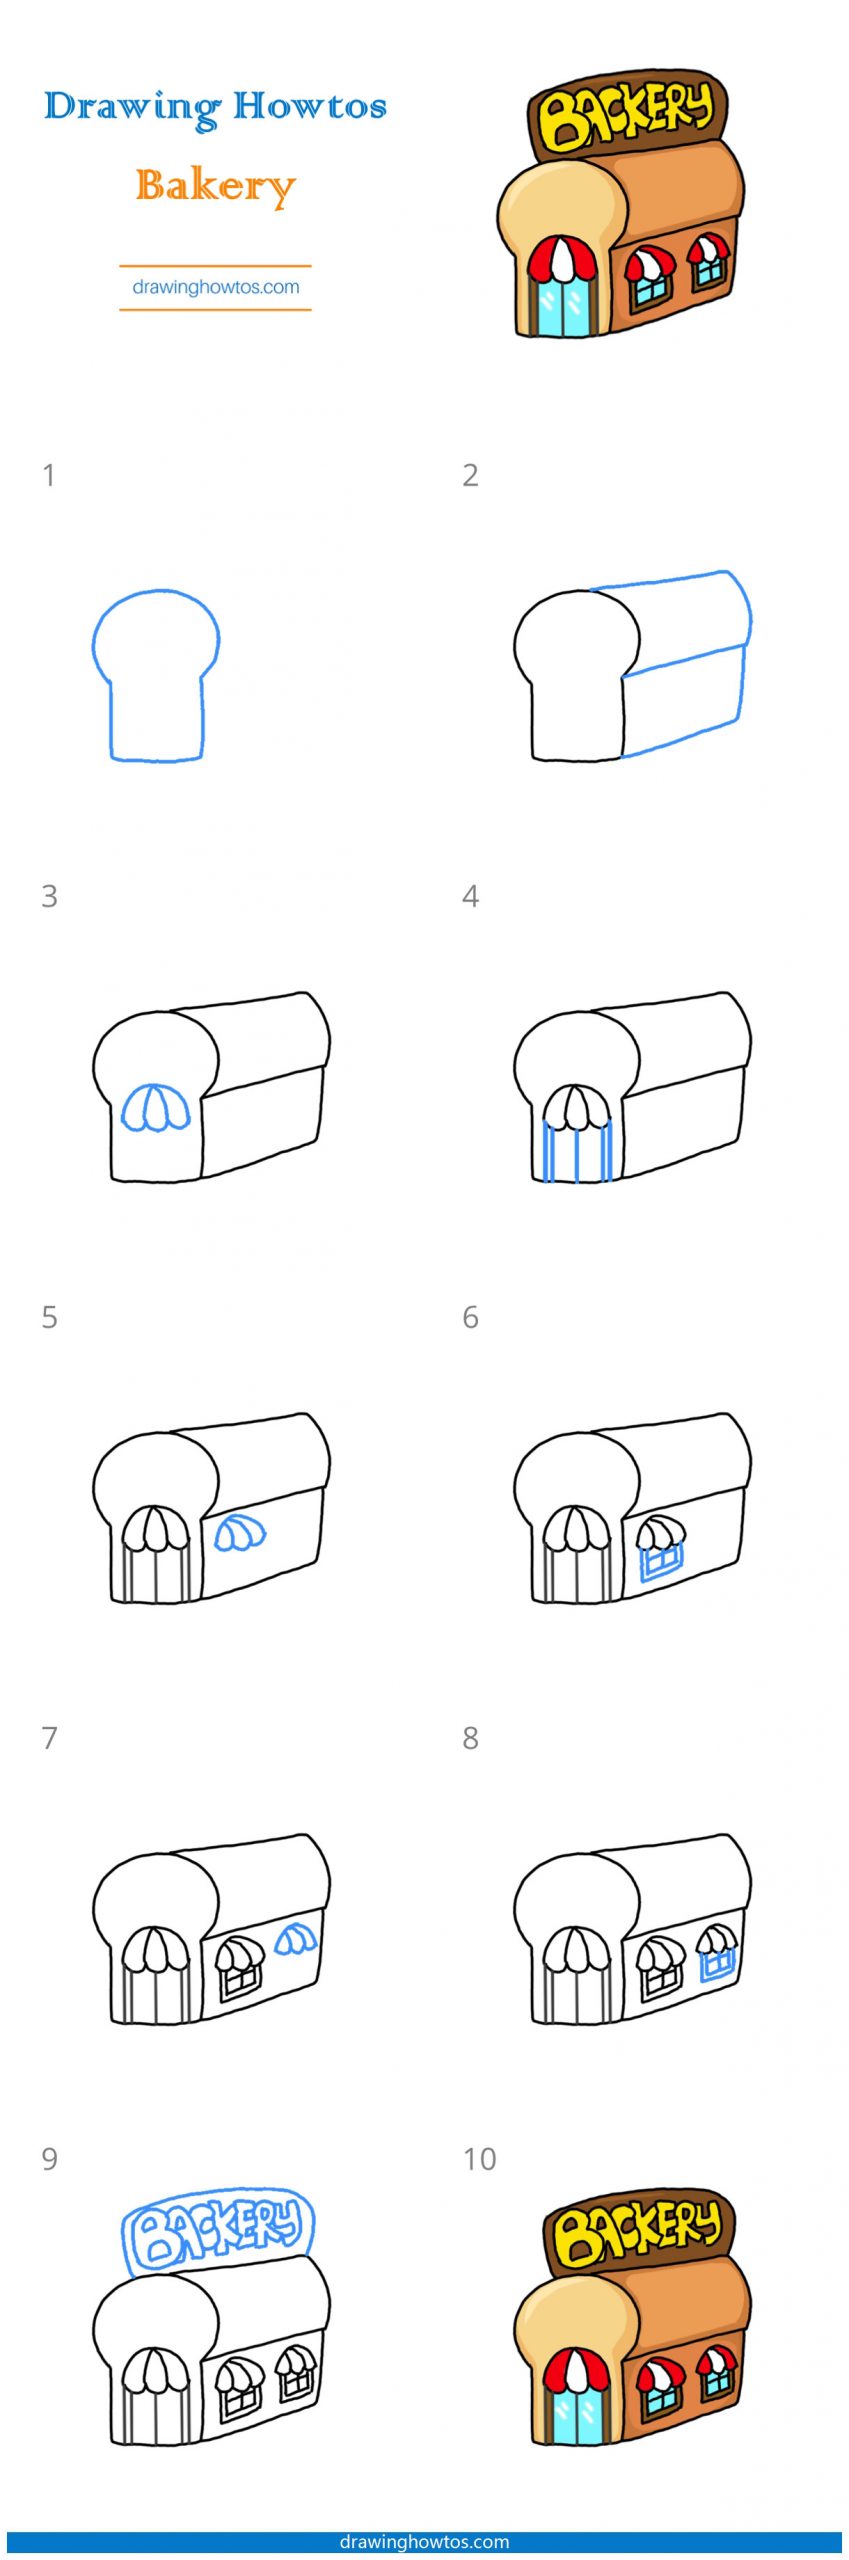 How to Draw a Bakery Step by Step